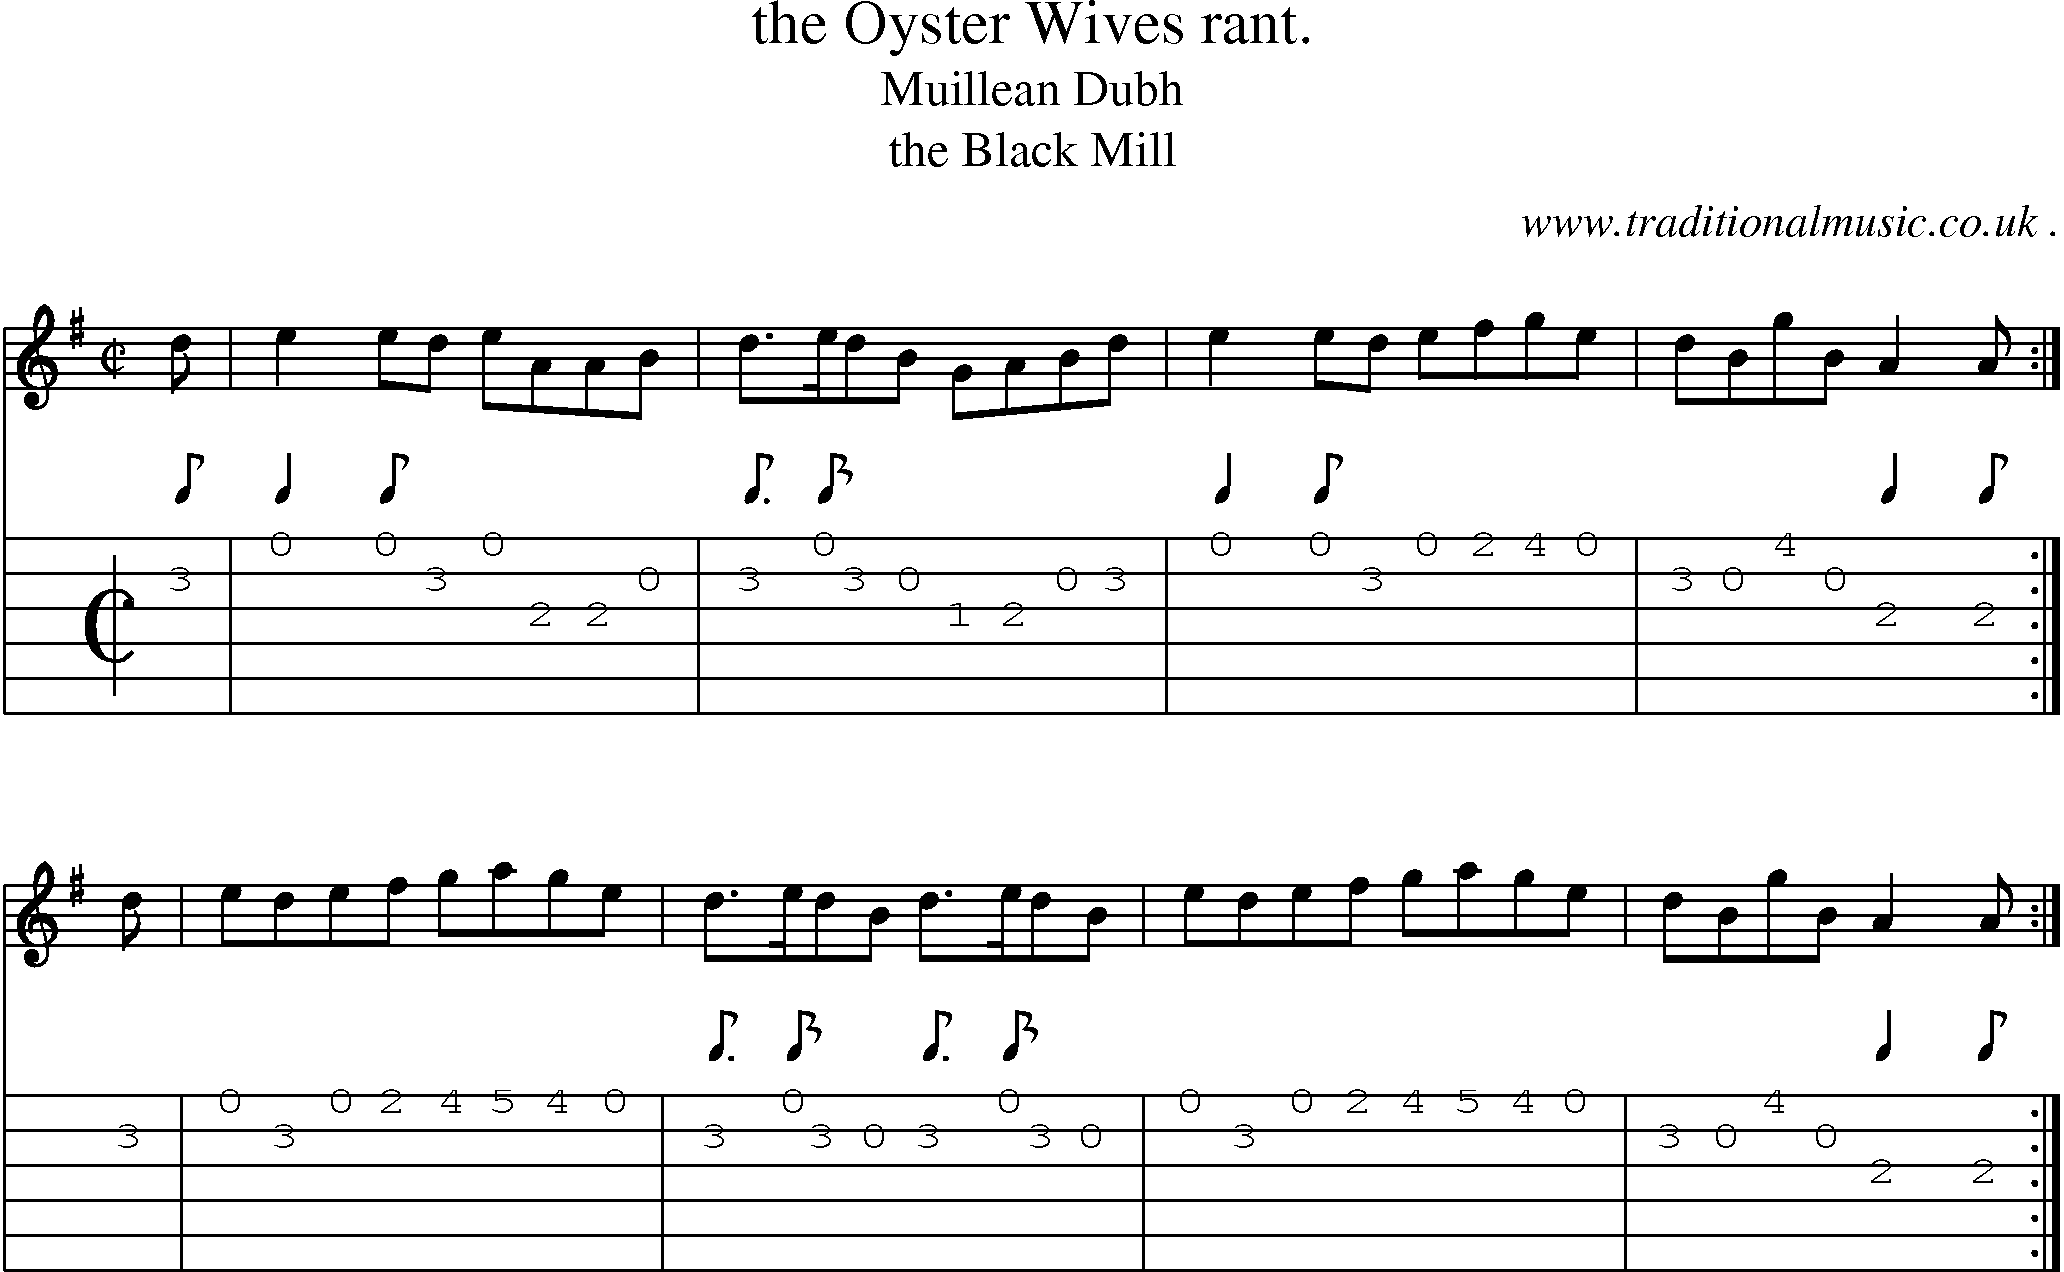 Sheet-Music and Guitar Tabs for The Oyster Wives Rant